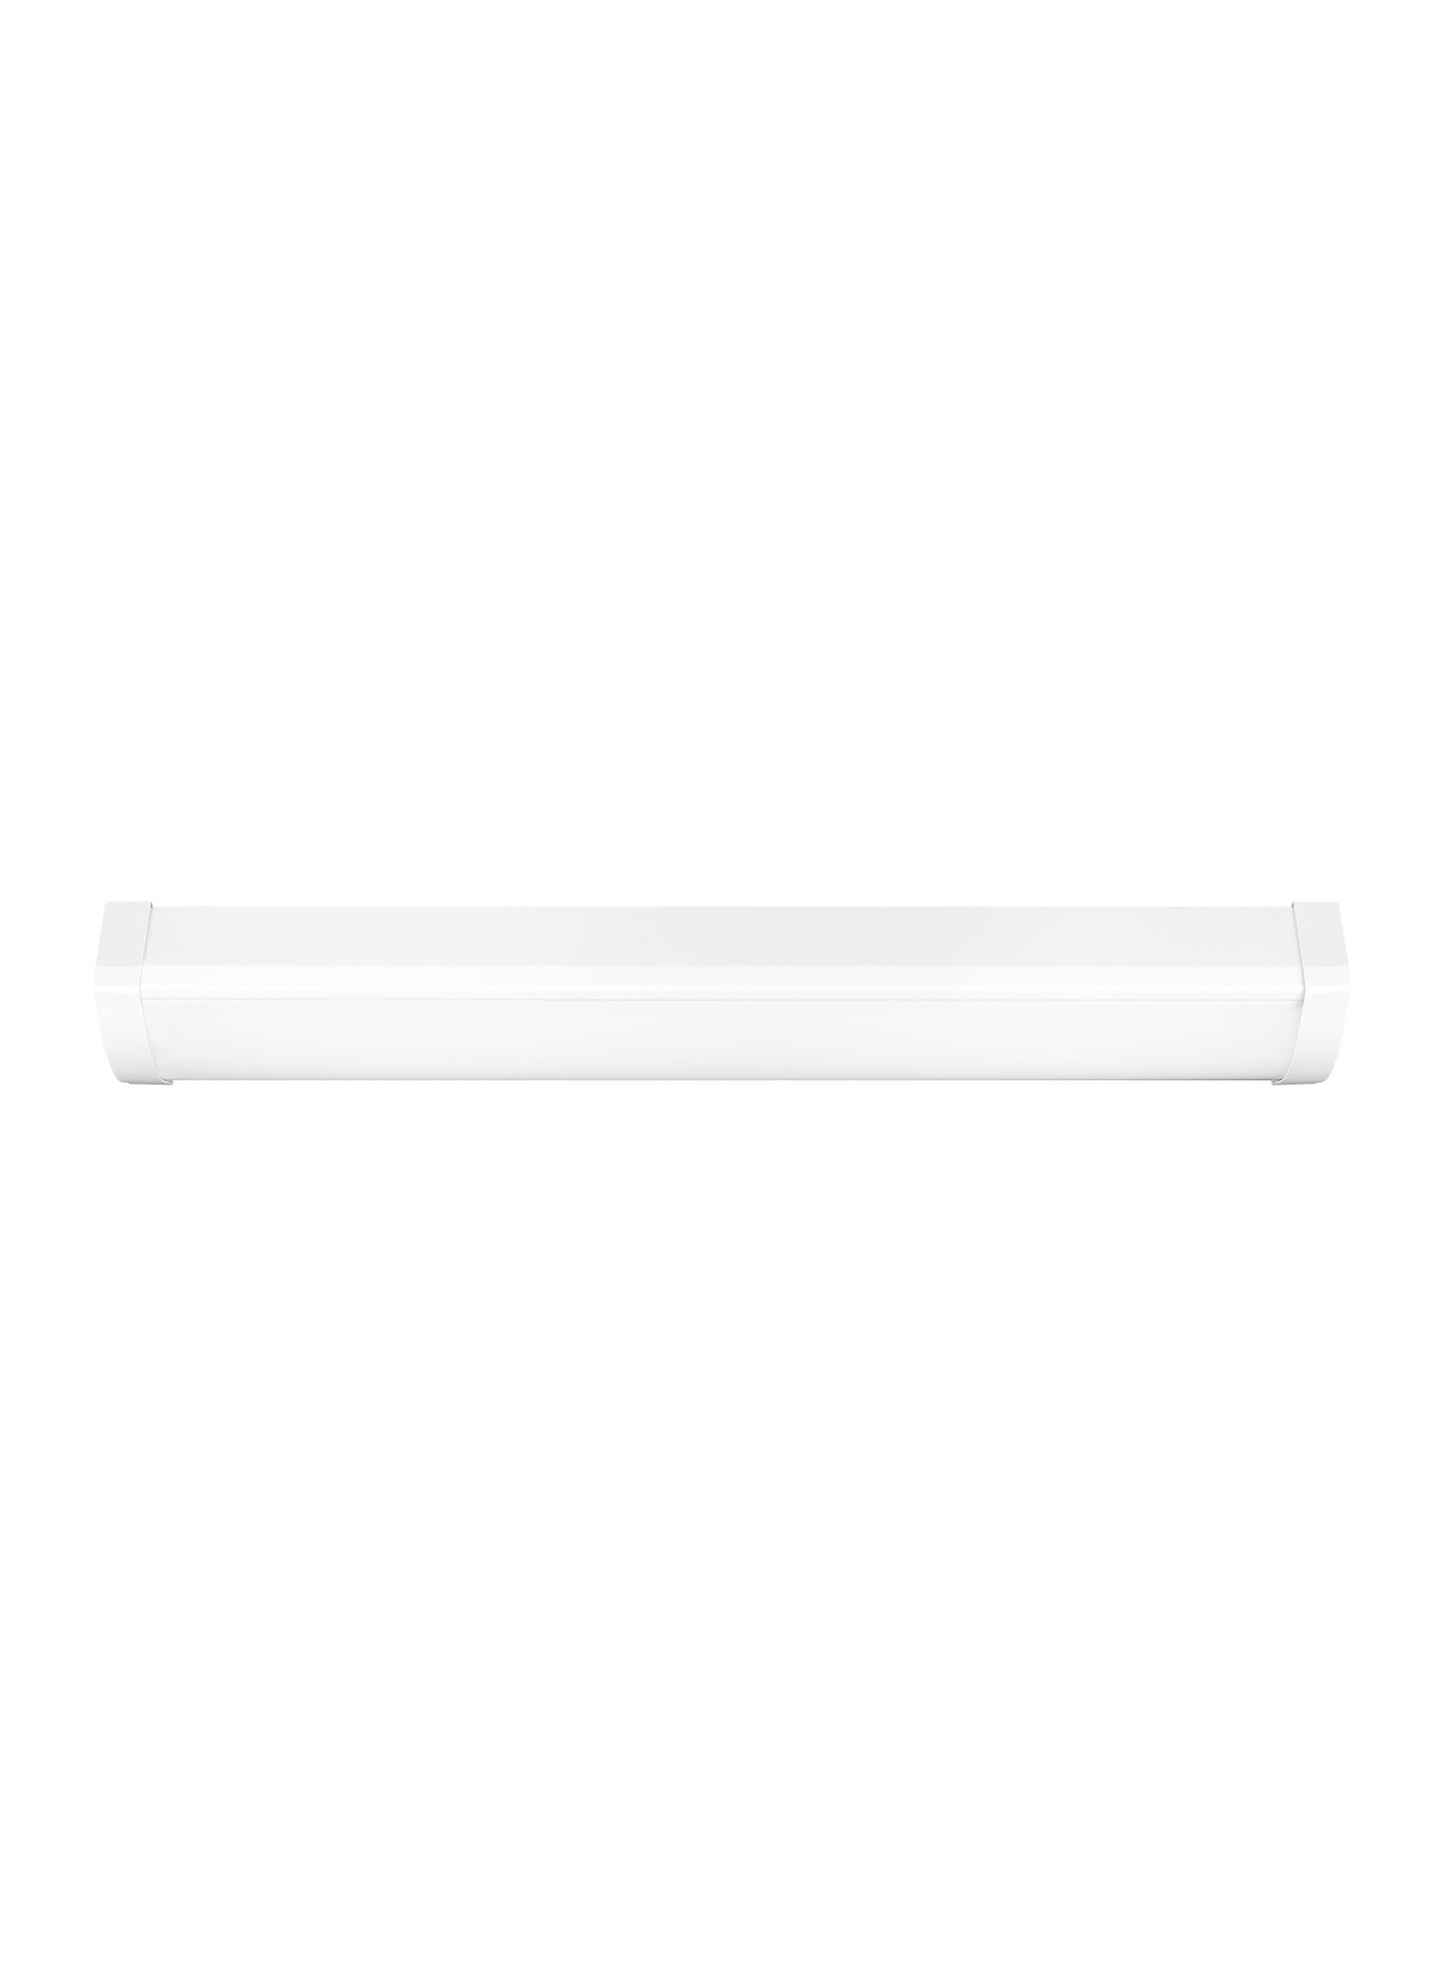 Drop Lens LED traditional 1-light LED indoor dimmable two foot ceiling flush mount in white finish with frosted acrylic di...